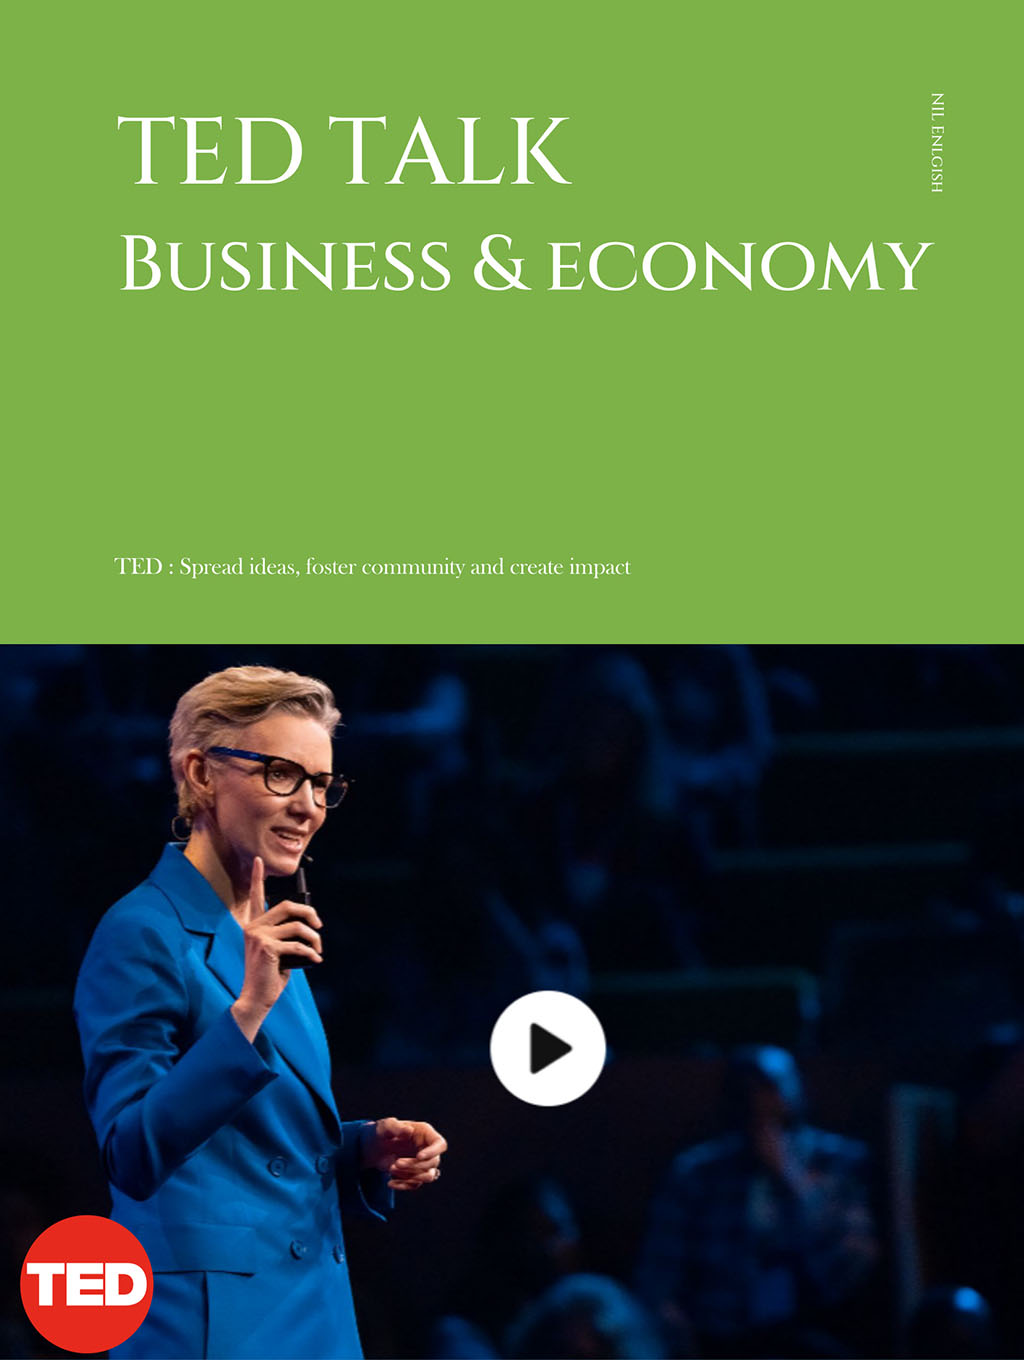 TED Talk - Business & Economy